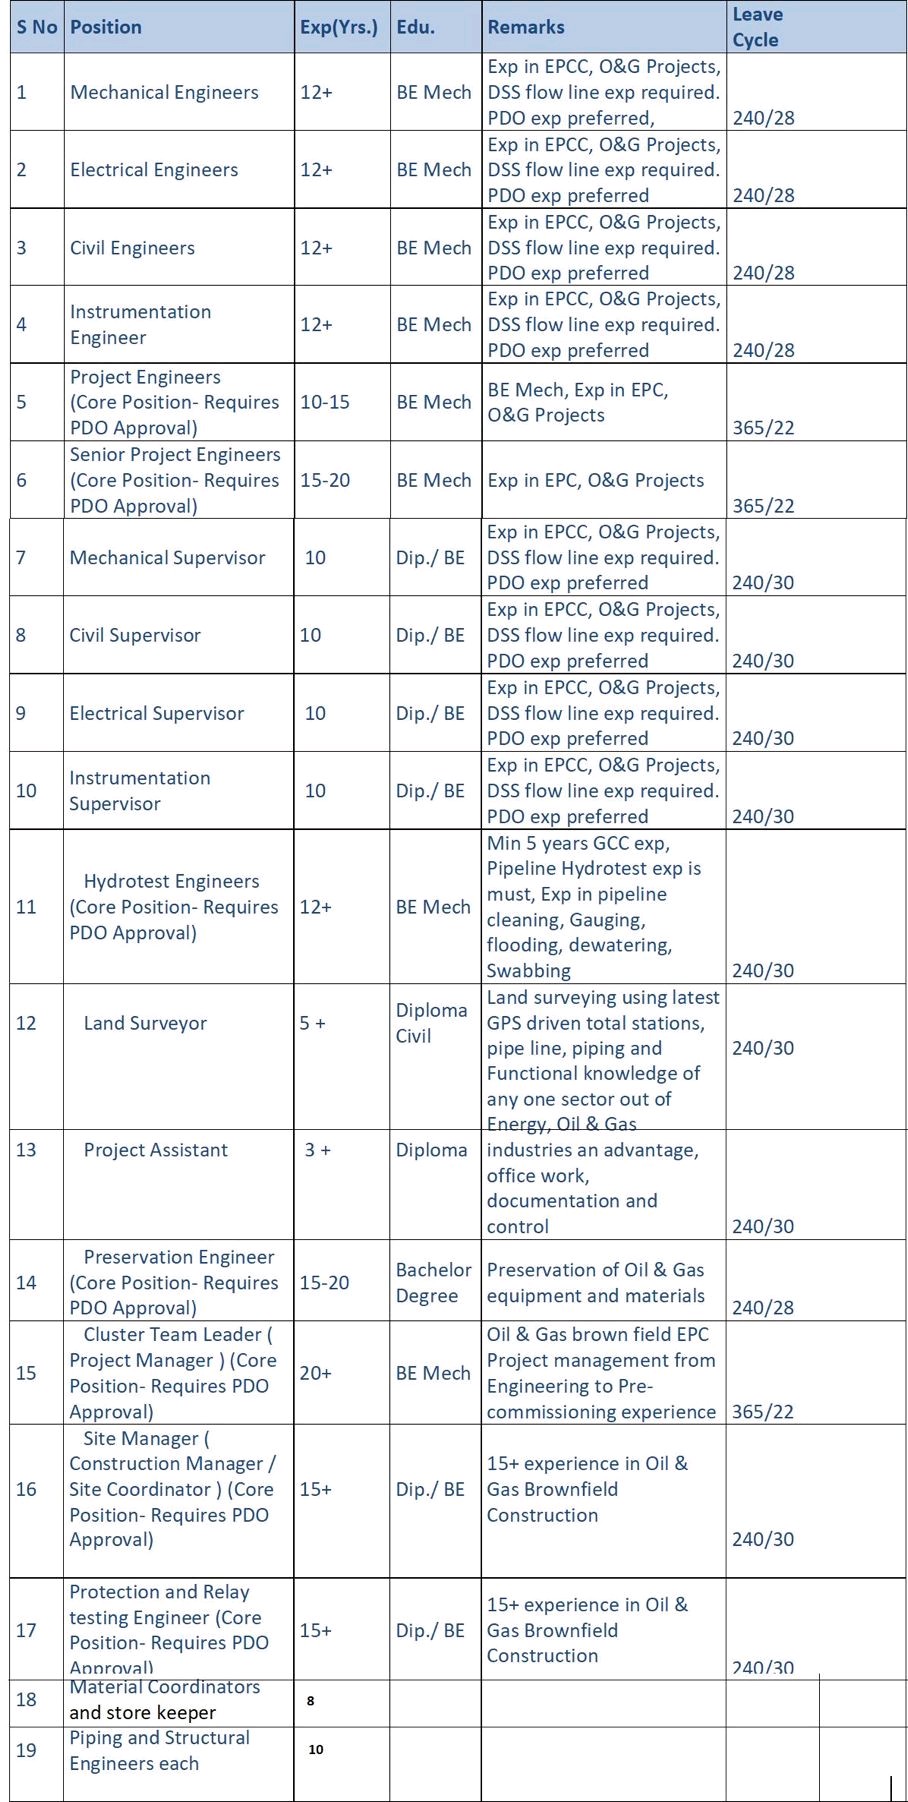 Mechanical, Electrical, Civil, Instrumentation, Hydrotest, Piping & Structural Engineer Jobs